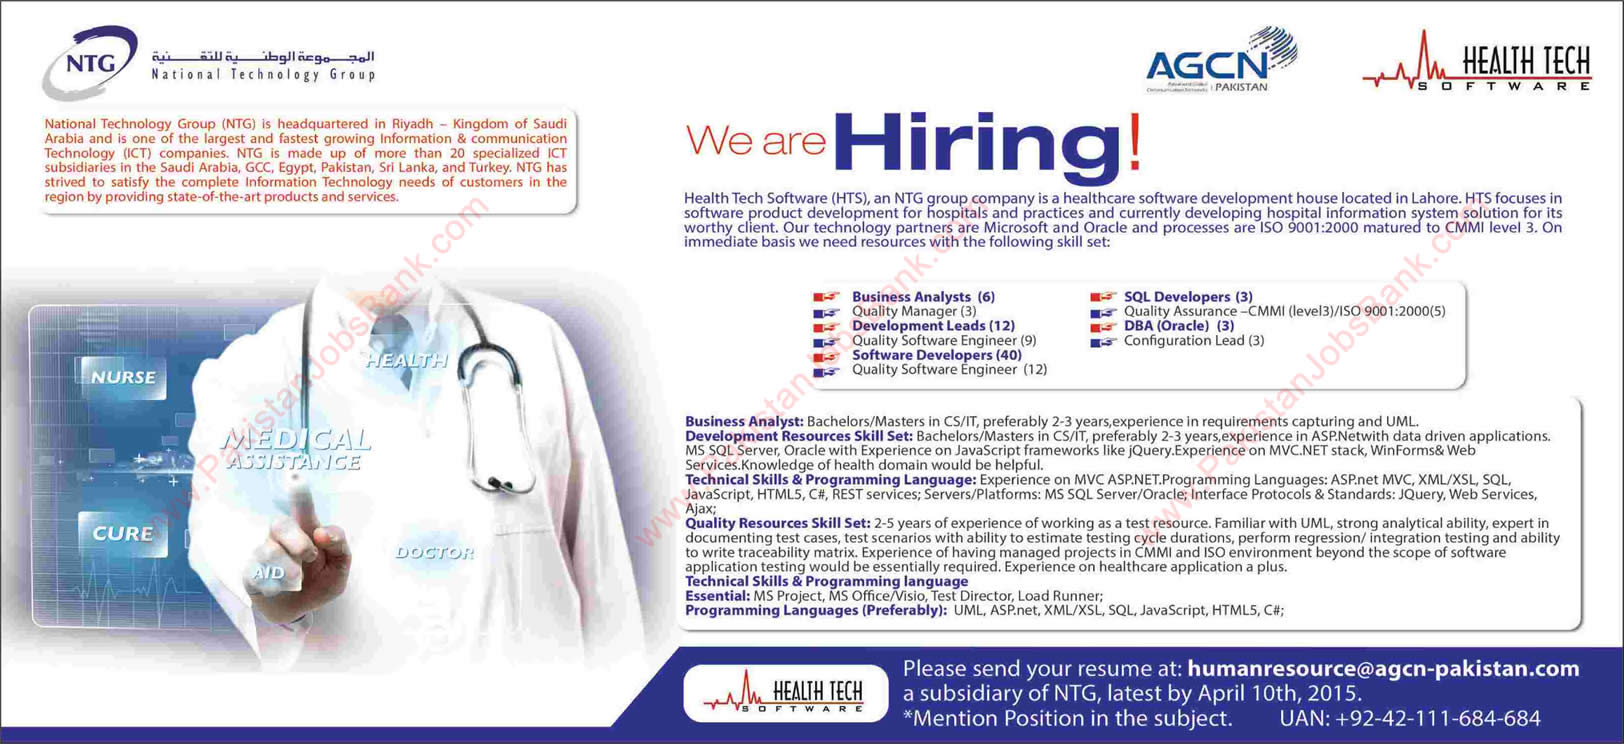 AGCN Pakistan Jobs 2015 March / April in Lahore at NTG Health Tech Software Developers / QA Engineers & Others